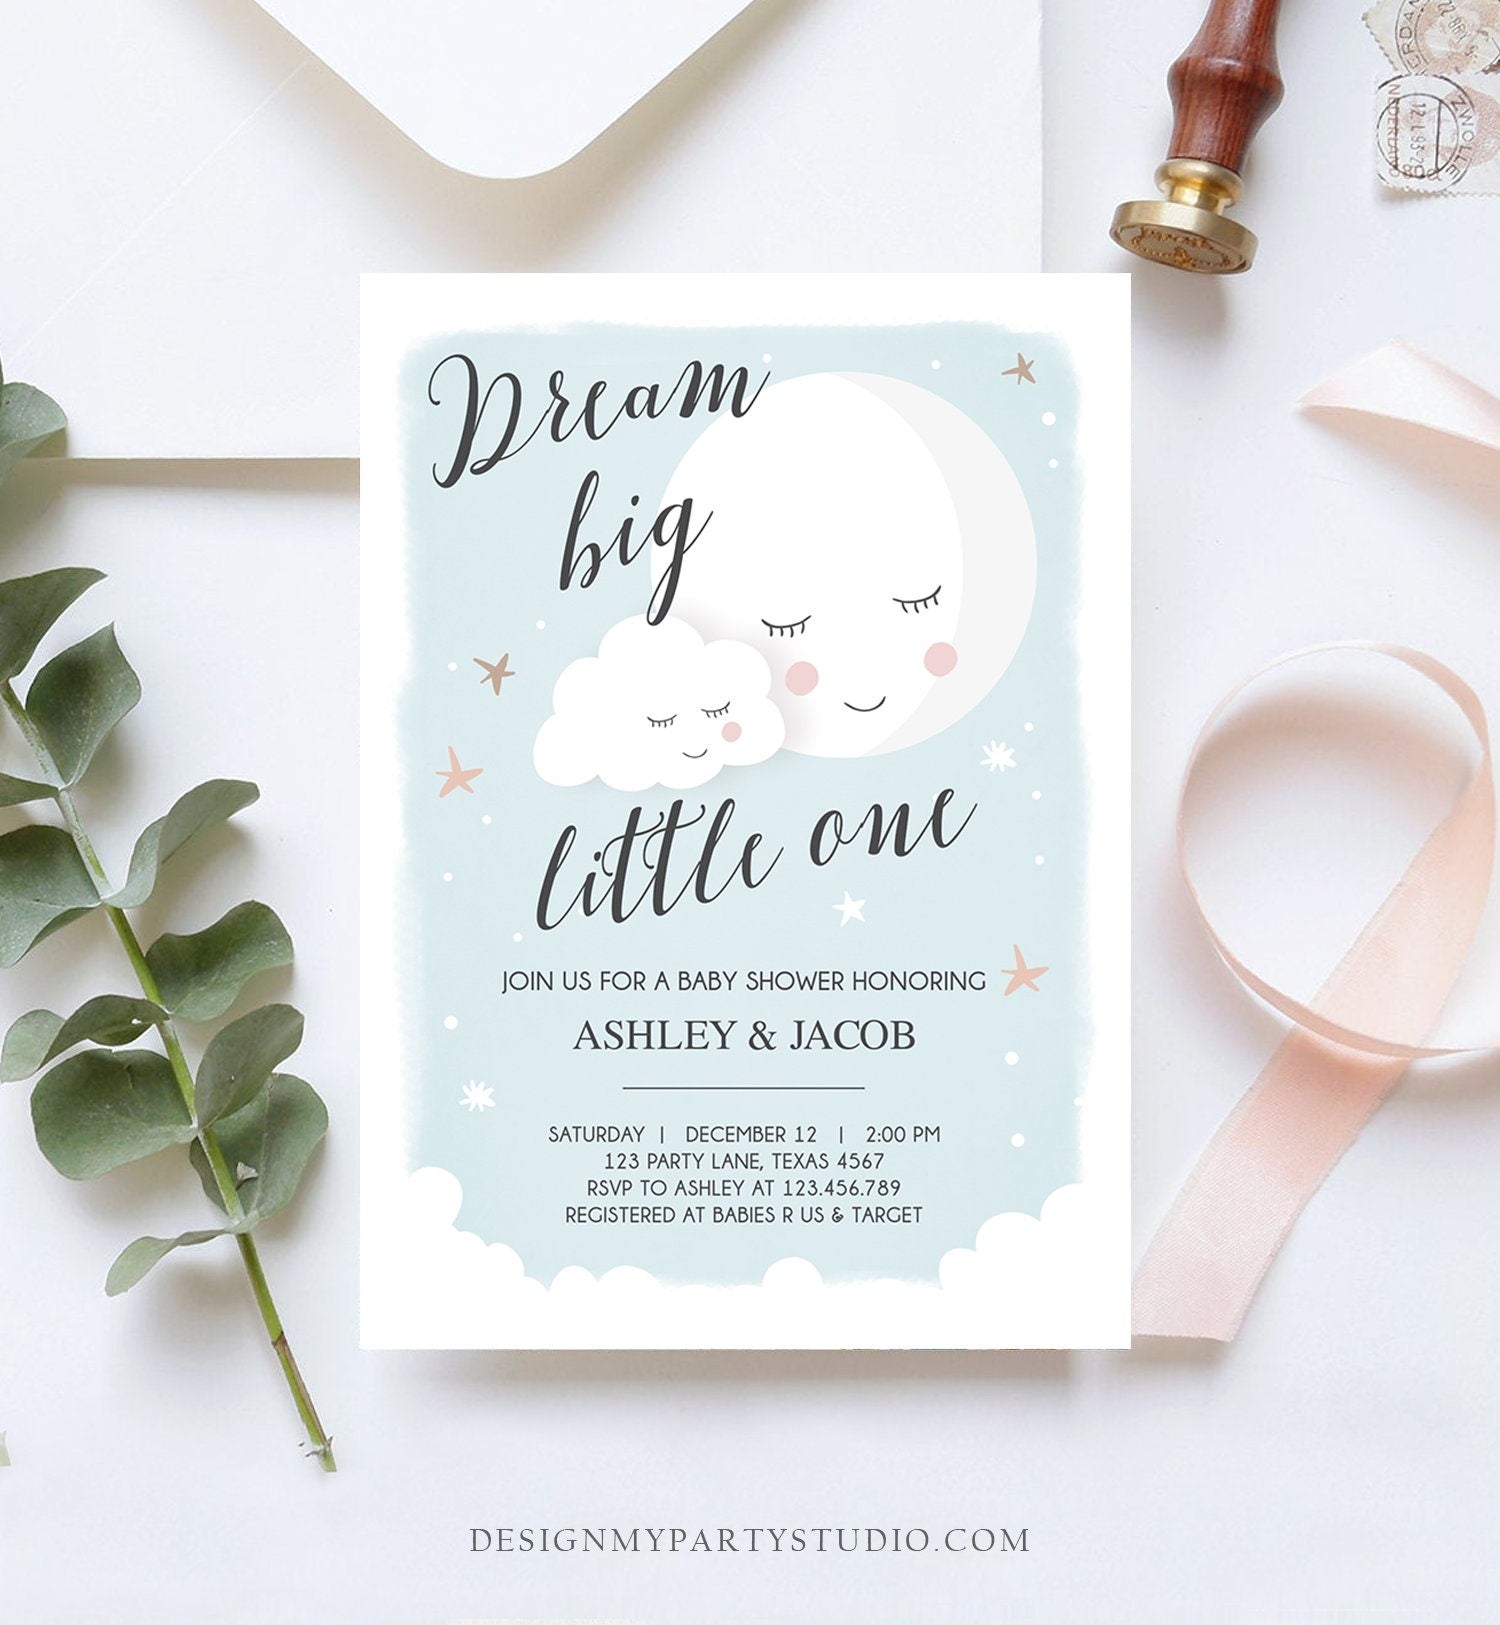 Editable Dream Big Little One Baby Shower Invitation Stars Moon and Back Invites Blue Boy Baby Shower Sprinkle Template Download Corjl 0113